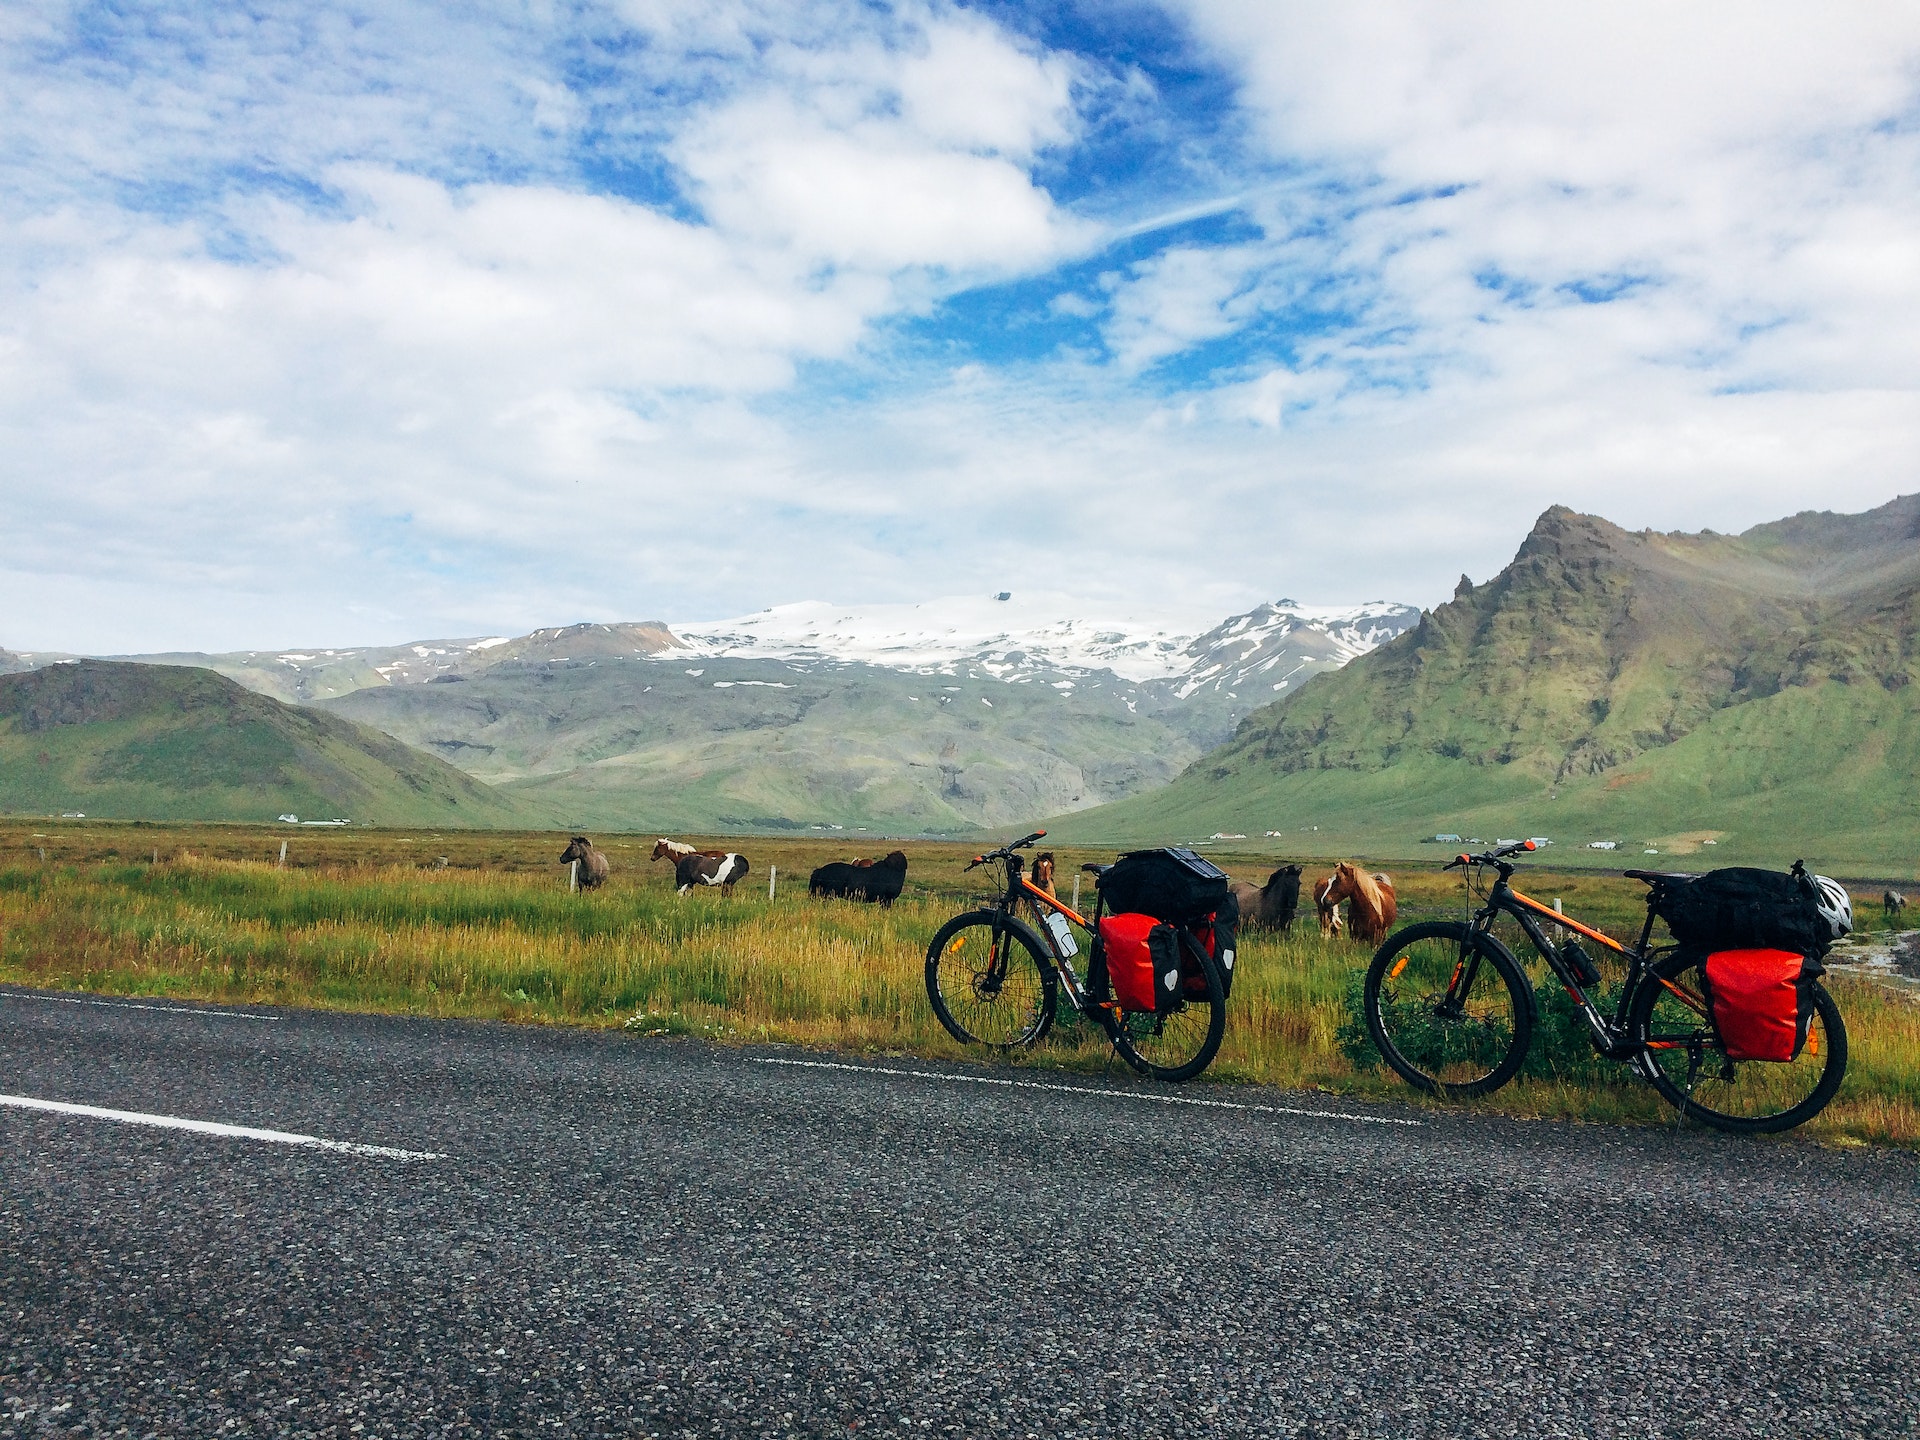 Two touring mountain bikes at the roadside with dramatic Icelandic landscape background.